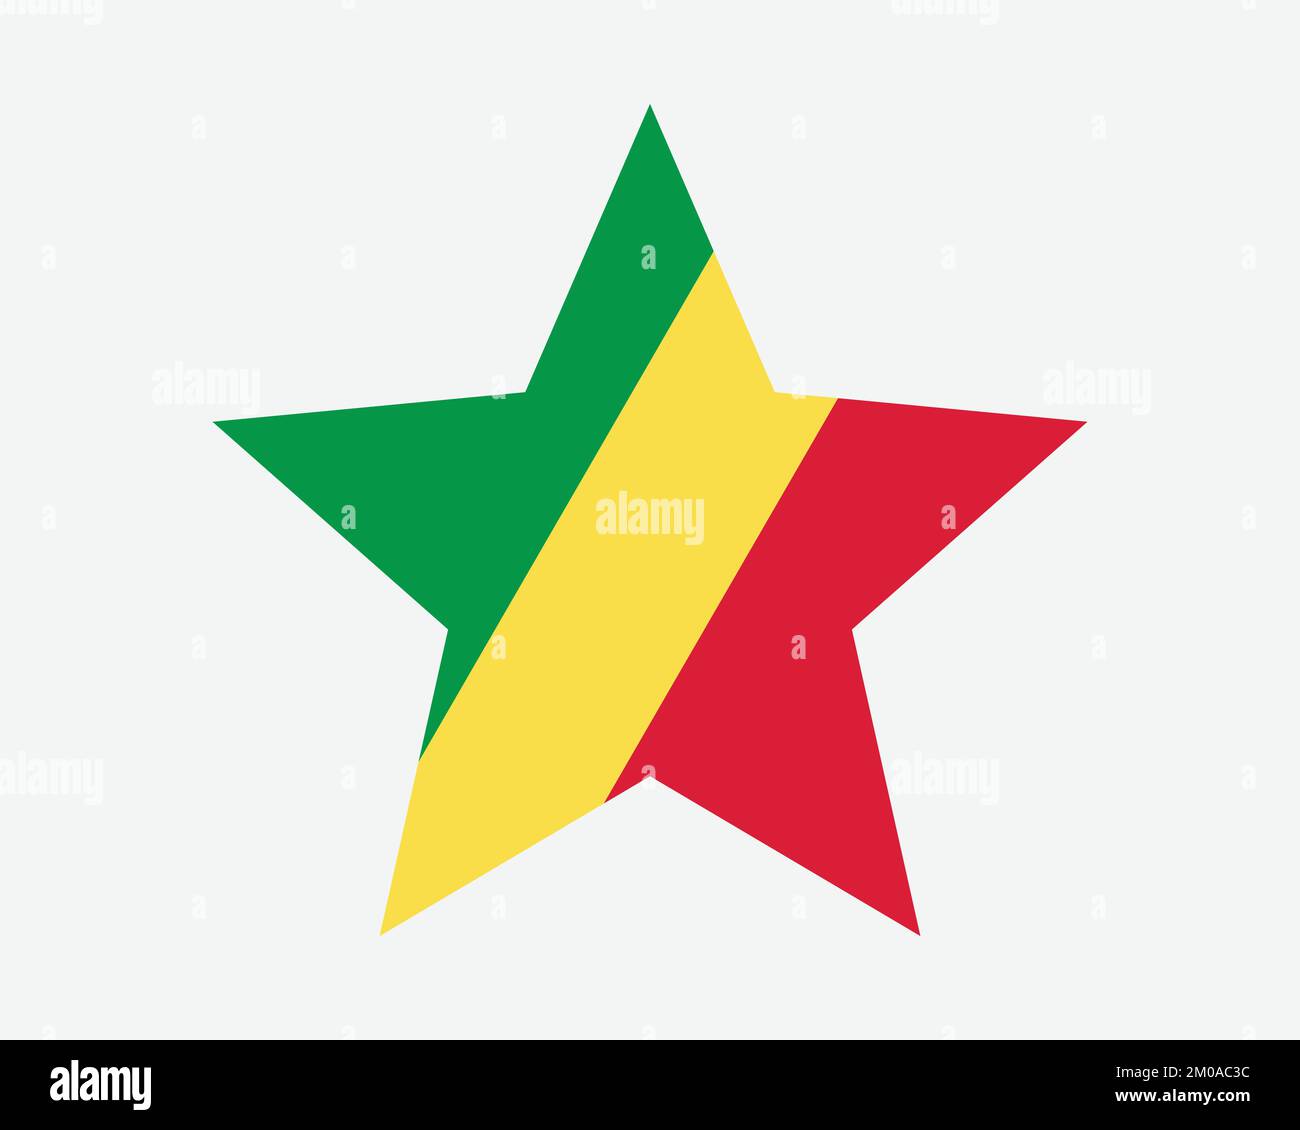 Republic of the Congo Star Flag. Congolese Star Shape Flag. The Congo Country National Banner Icon Symbol Vector 2D Flat Artwork Graphic Illustration Stock Vector